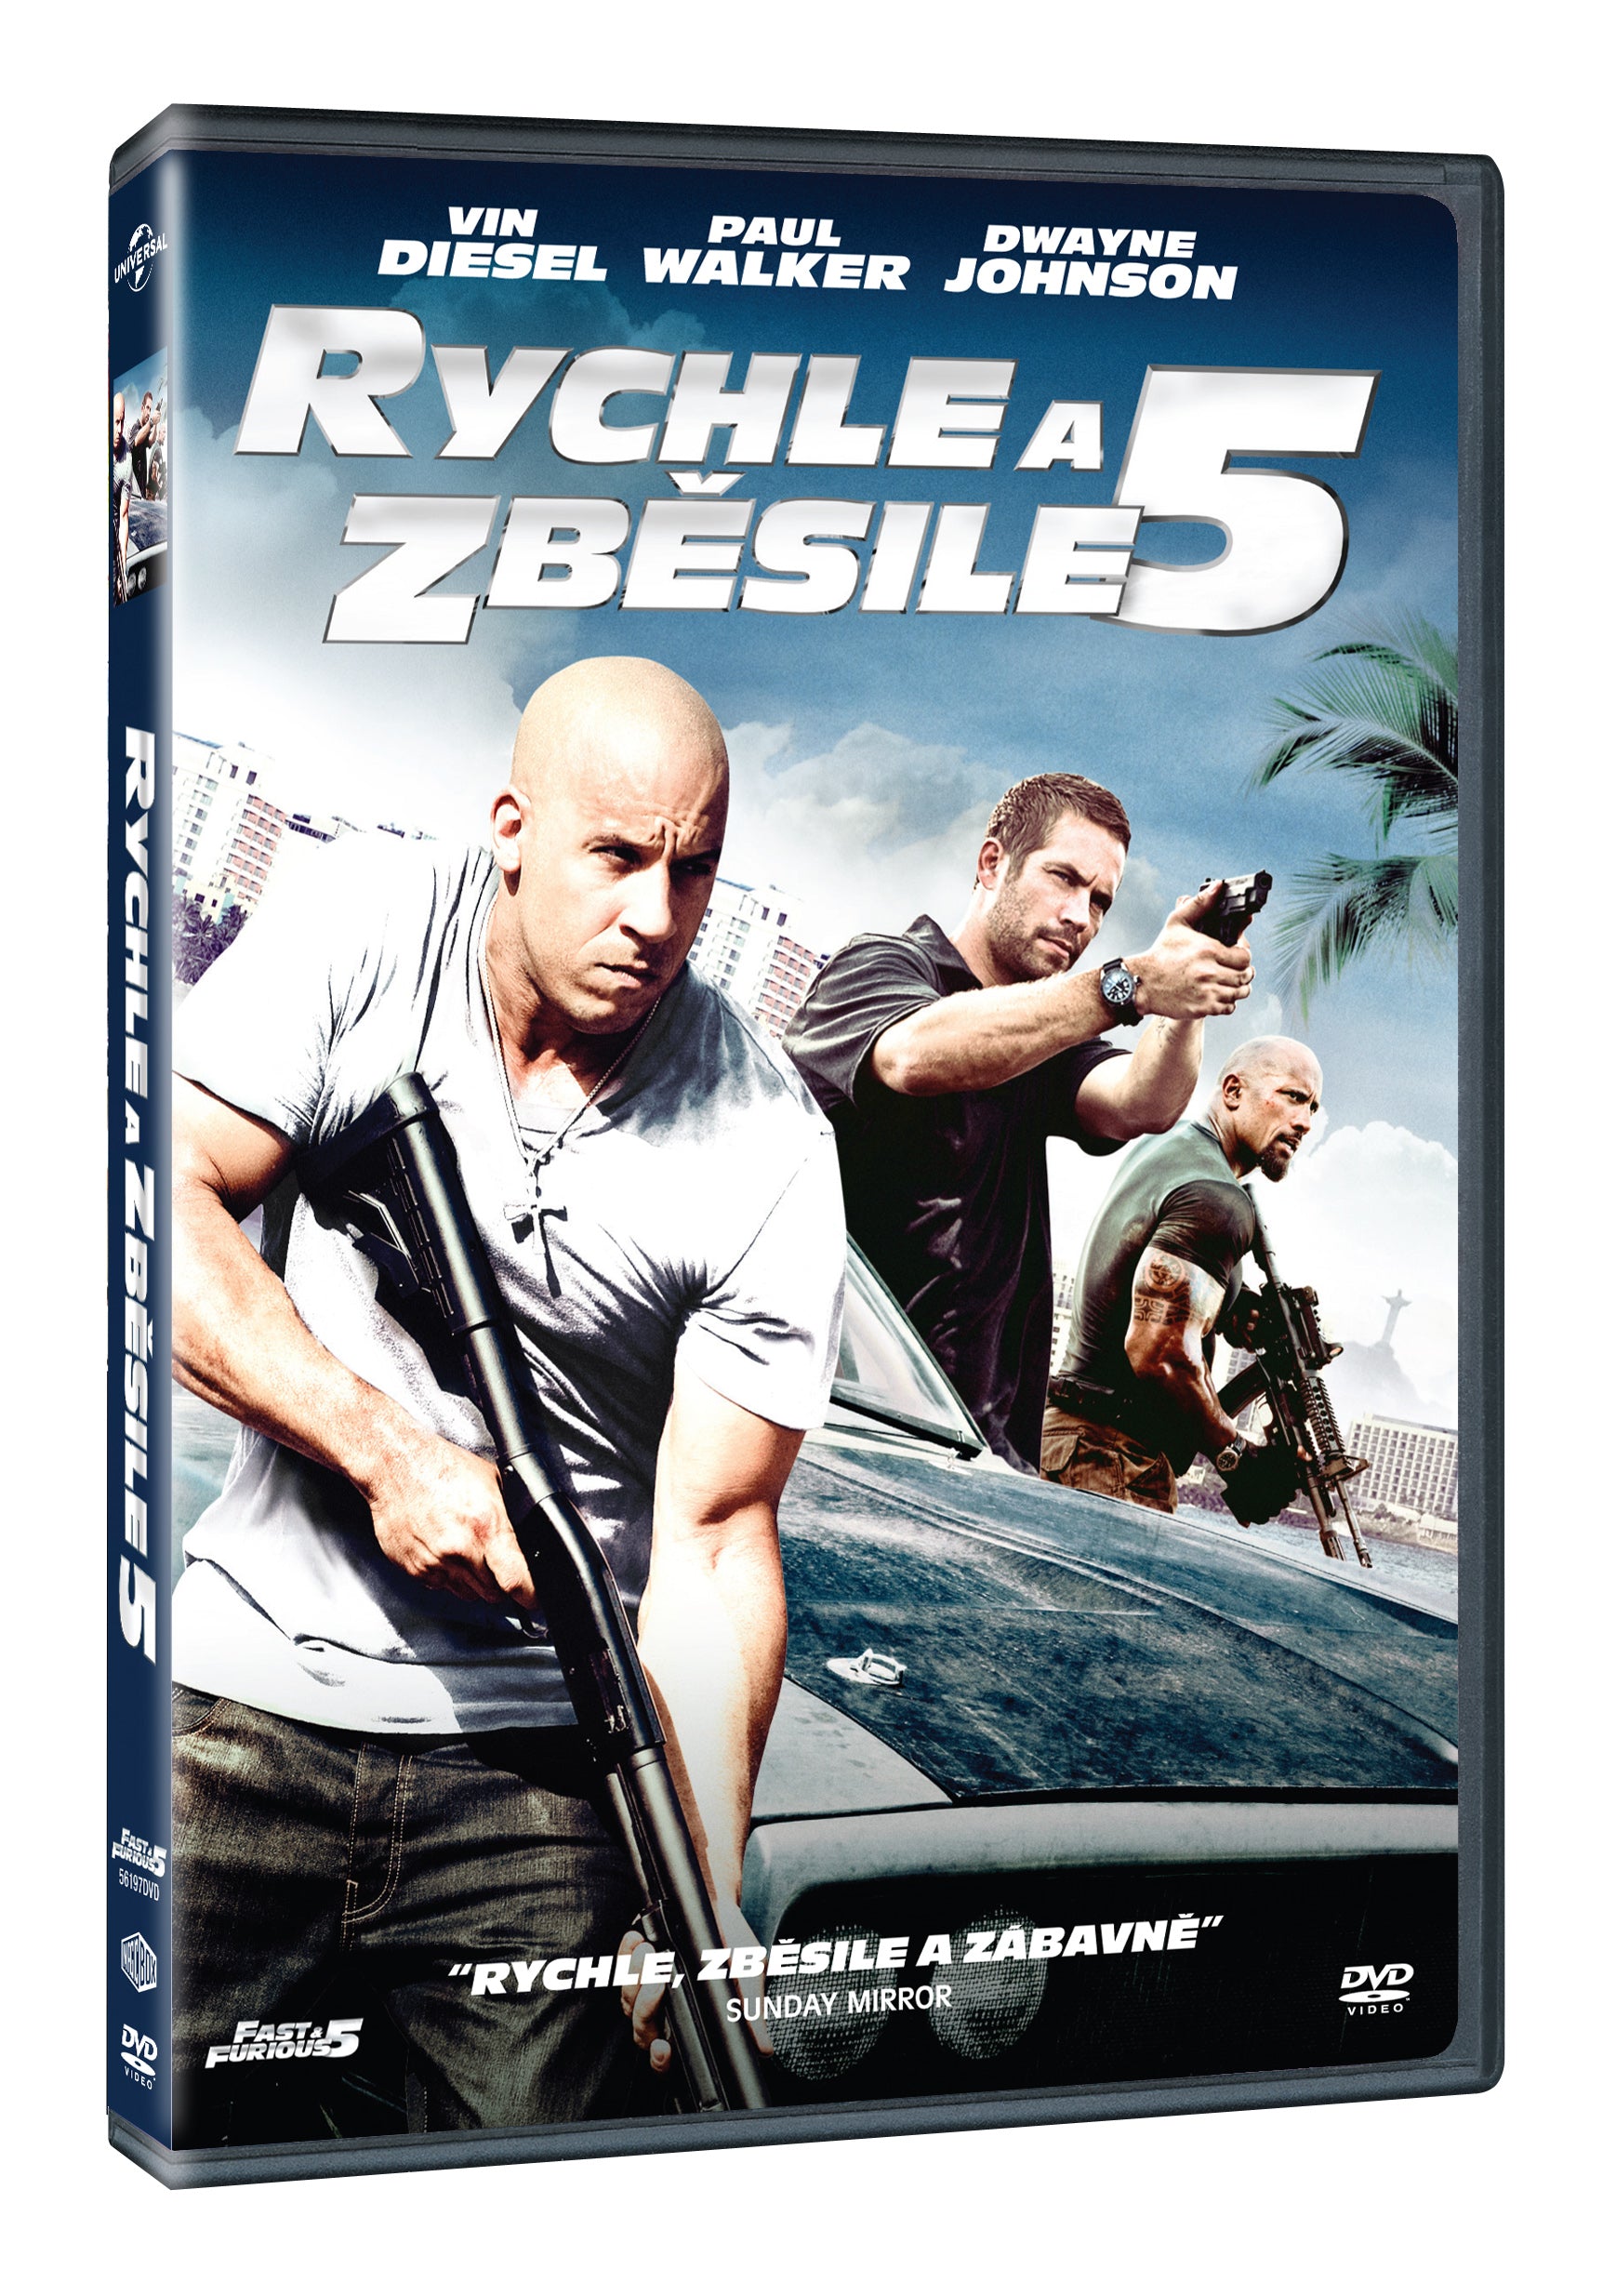 Rychle a zbesile 5 DVD / Fast Five